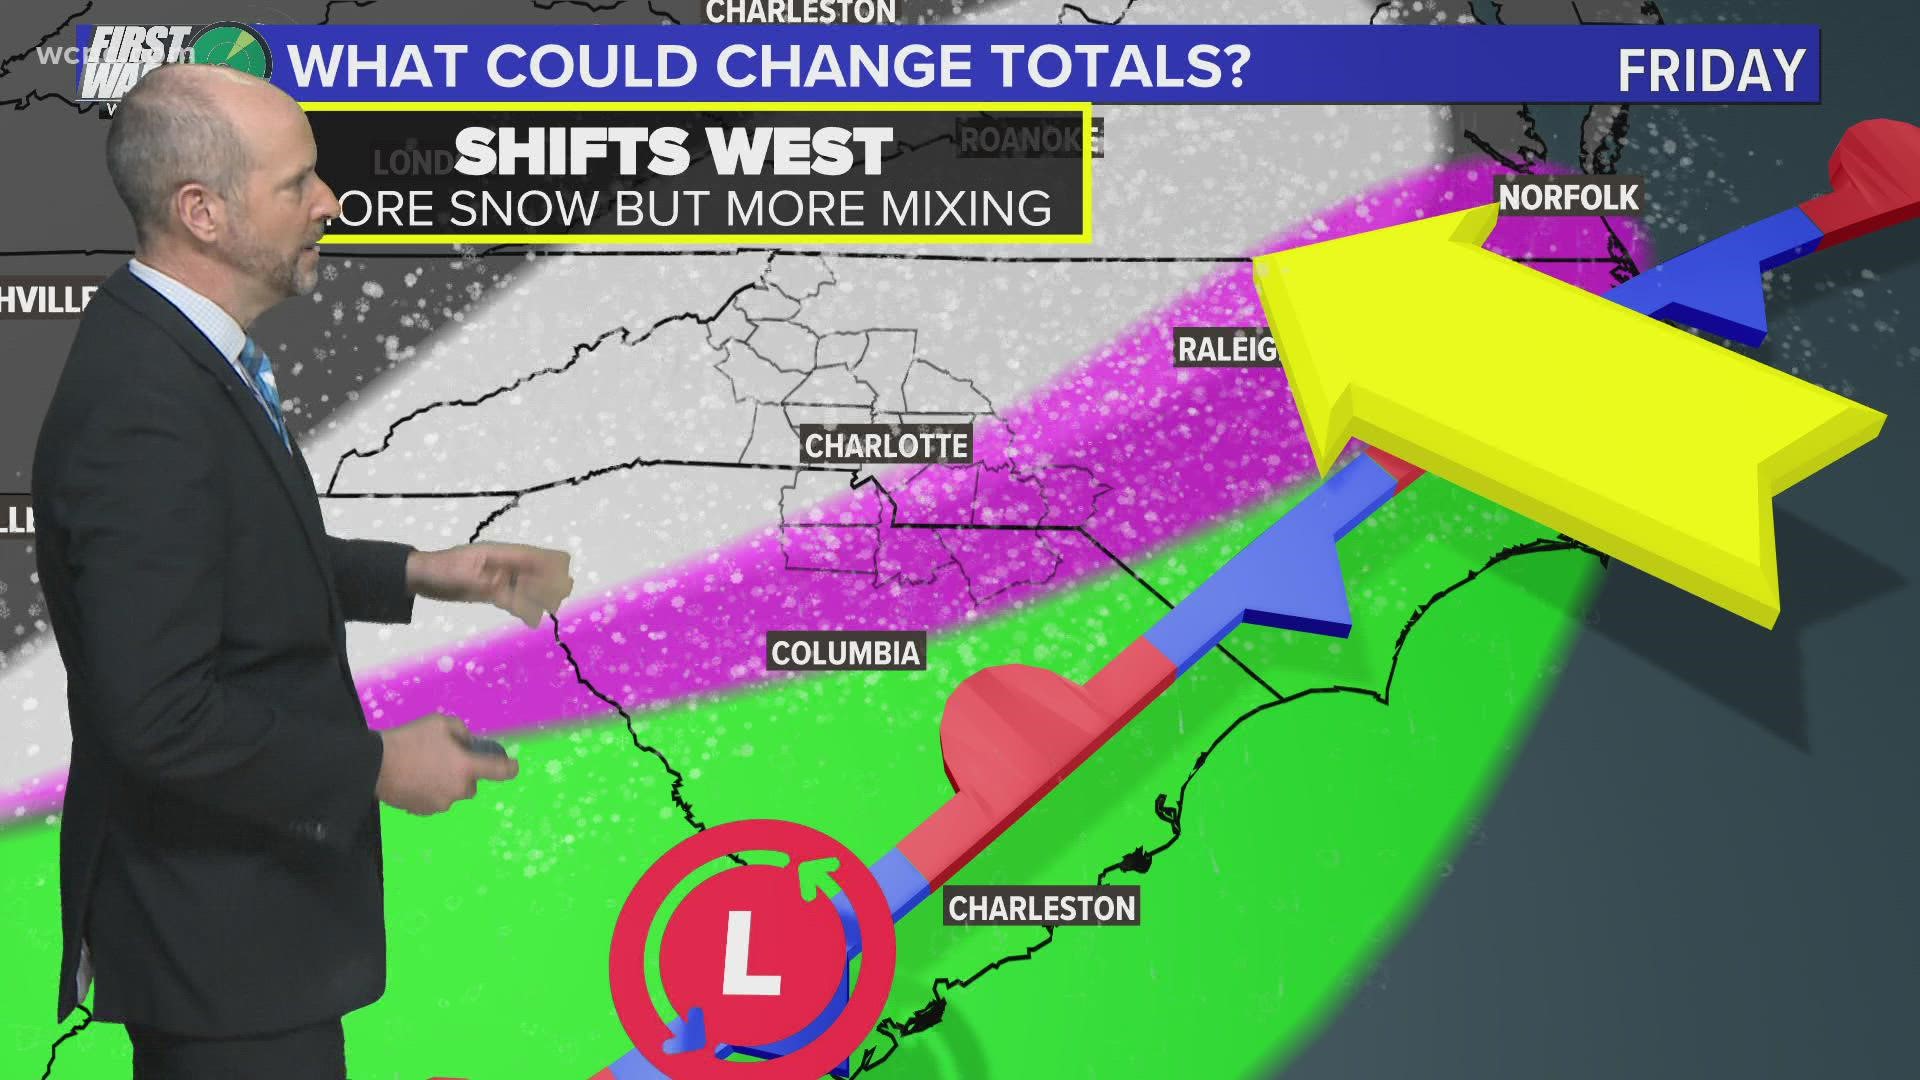 Brad Panovich breaks down what could affect how much snow and wintry mix we see.